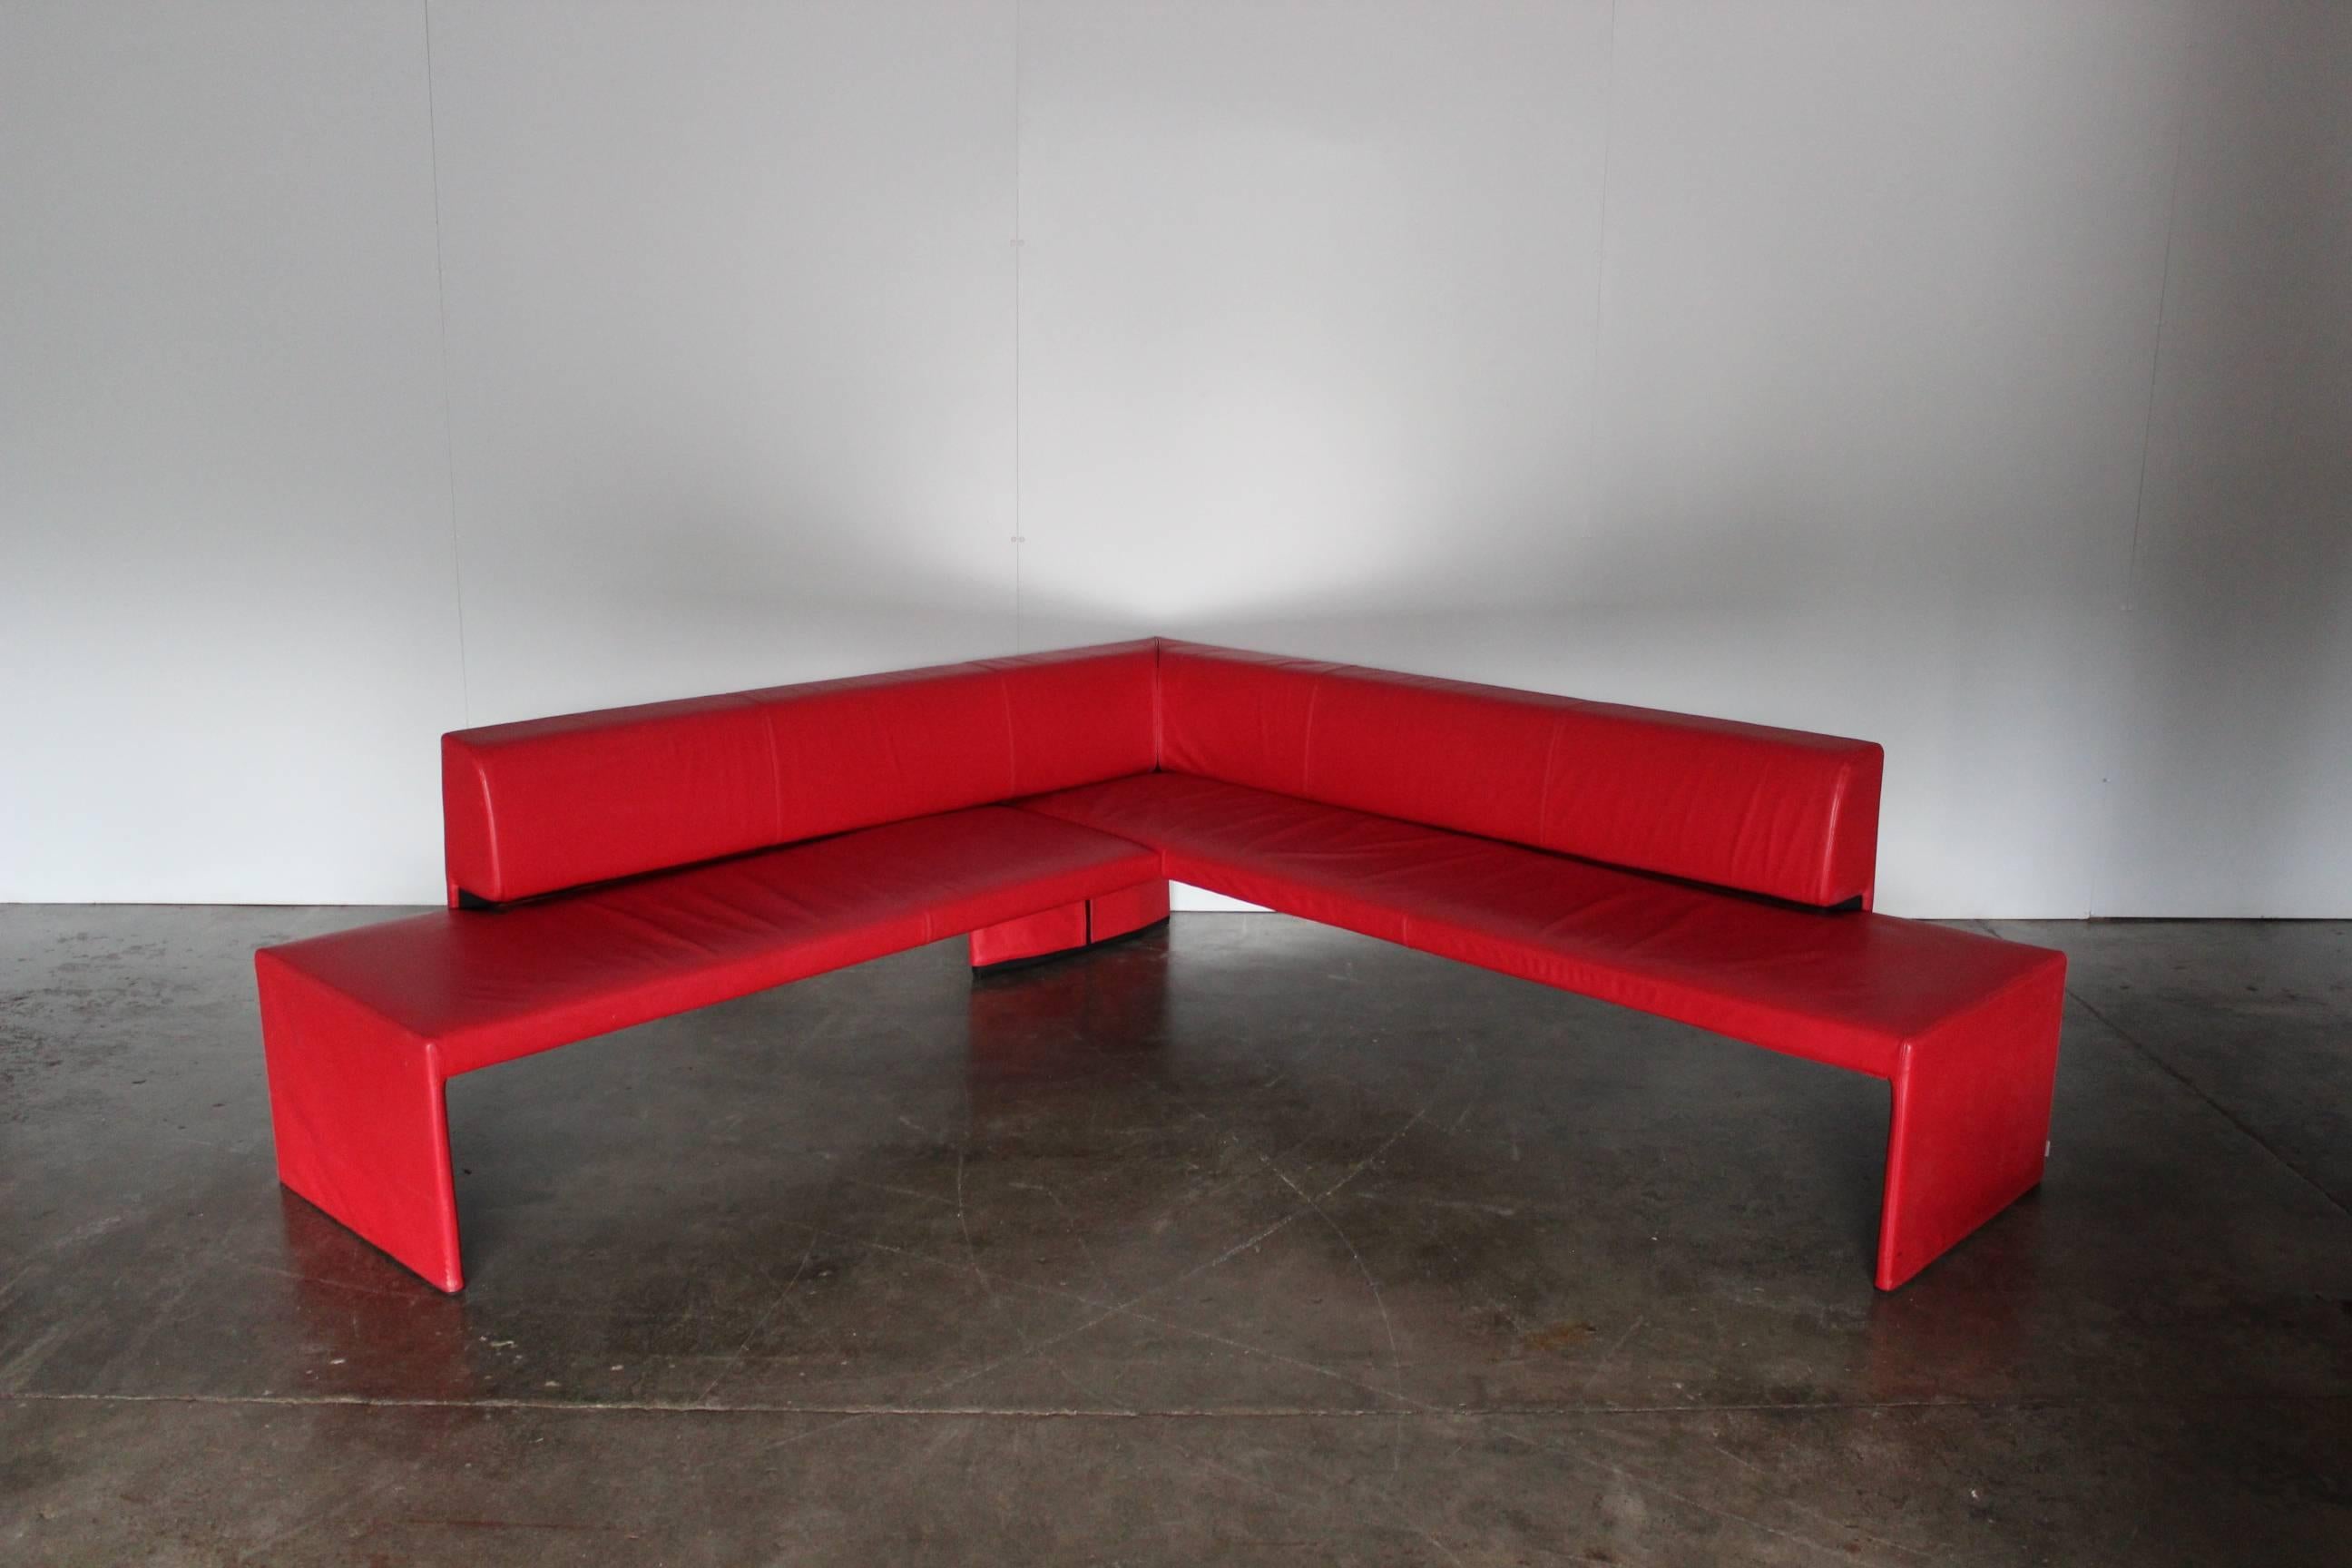 On offer on this occasion is a rare, superb “Together” corner seat from the world renown German furniture house of Walter Knoll, dressed in a sublime deep red leather.
As you will no doubt be aware by your interest in this EOOS-designed